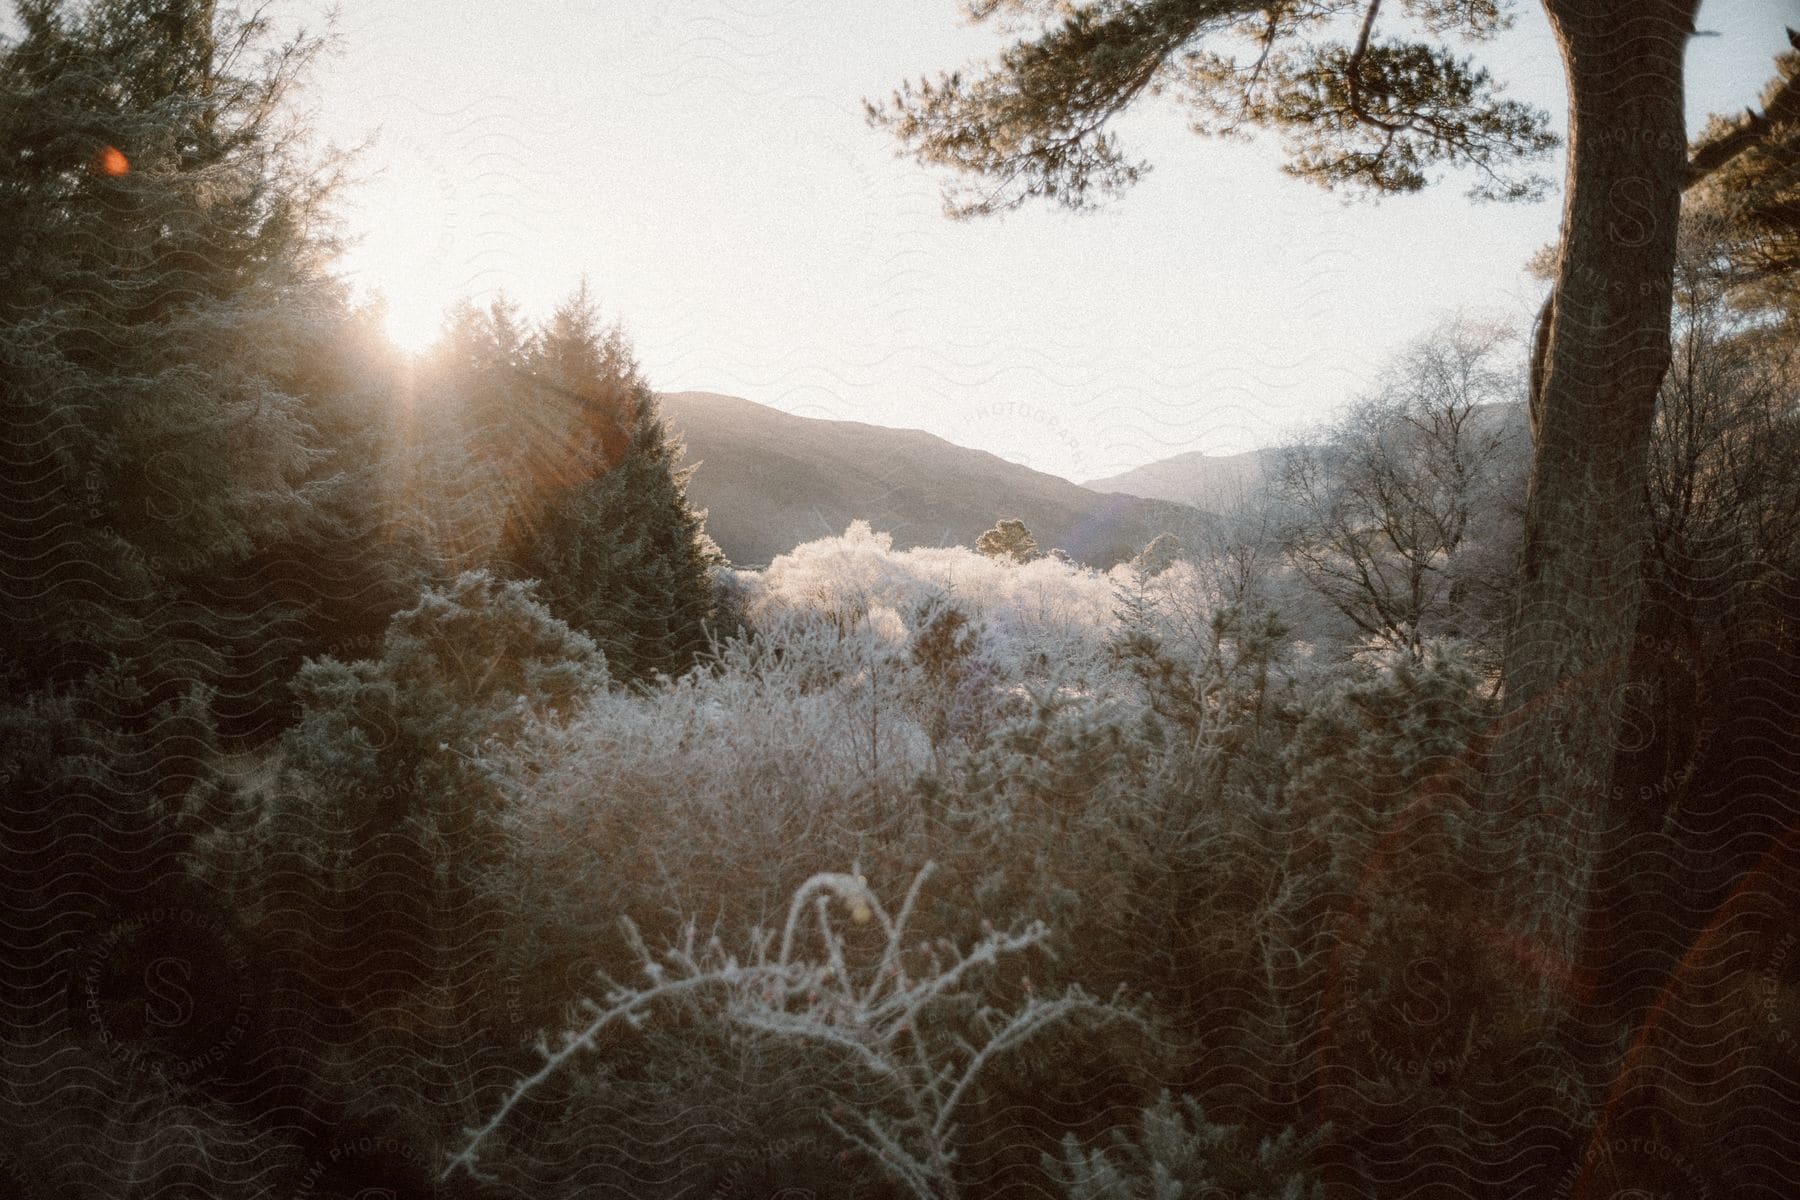 Ice covered trees and plants in the woods as the sun shines over a mountain in the distance